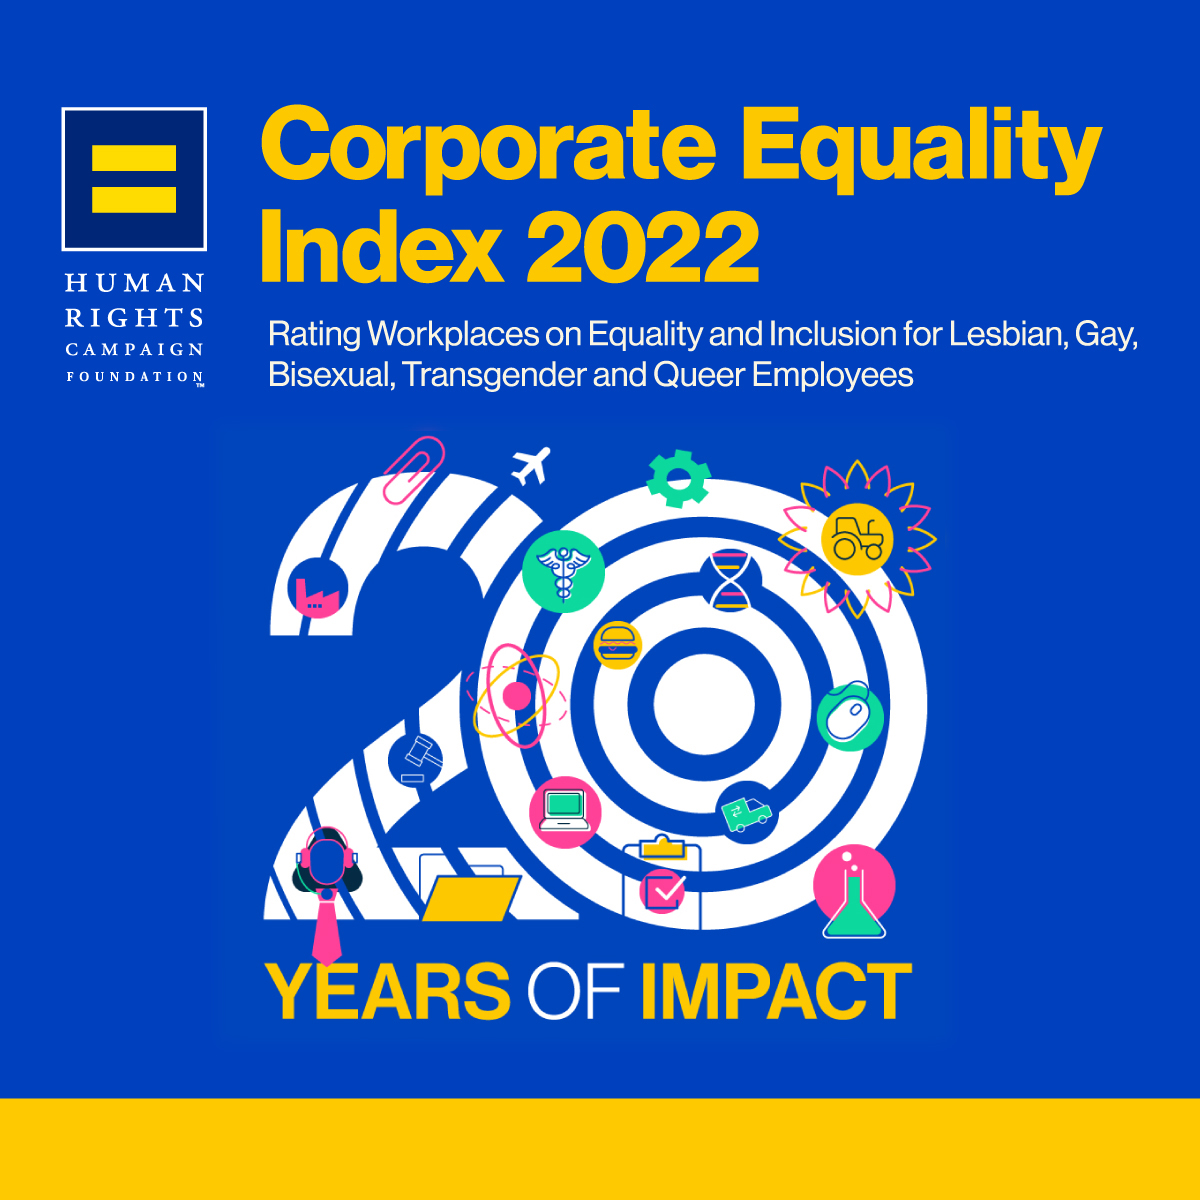 Carlton Fields Earns Perfect Score in Corporate Equality Index for 13th Consecutive Year